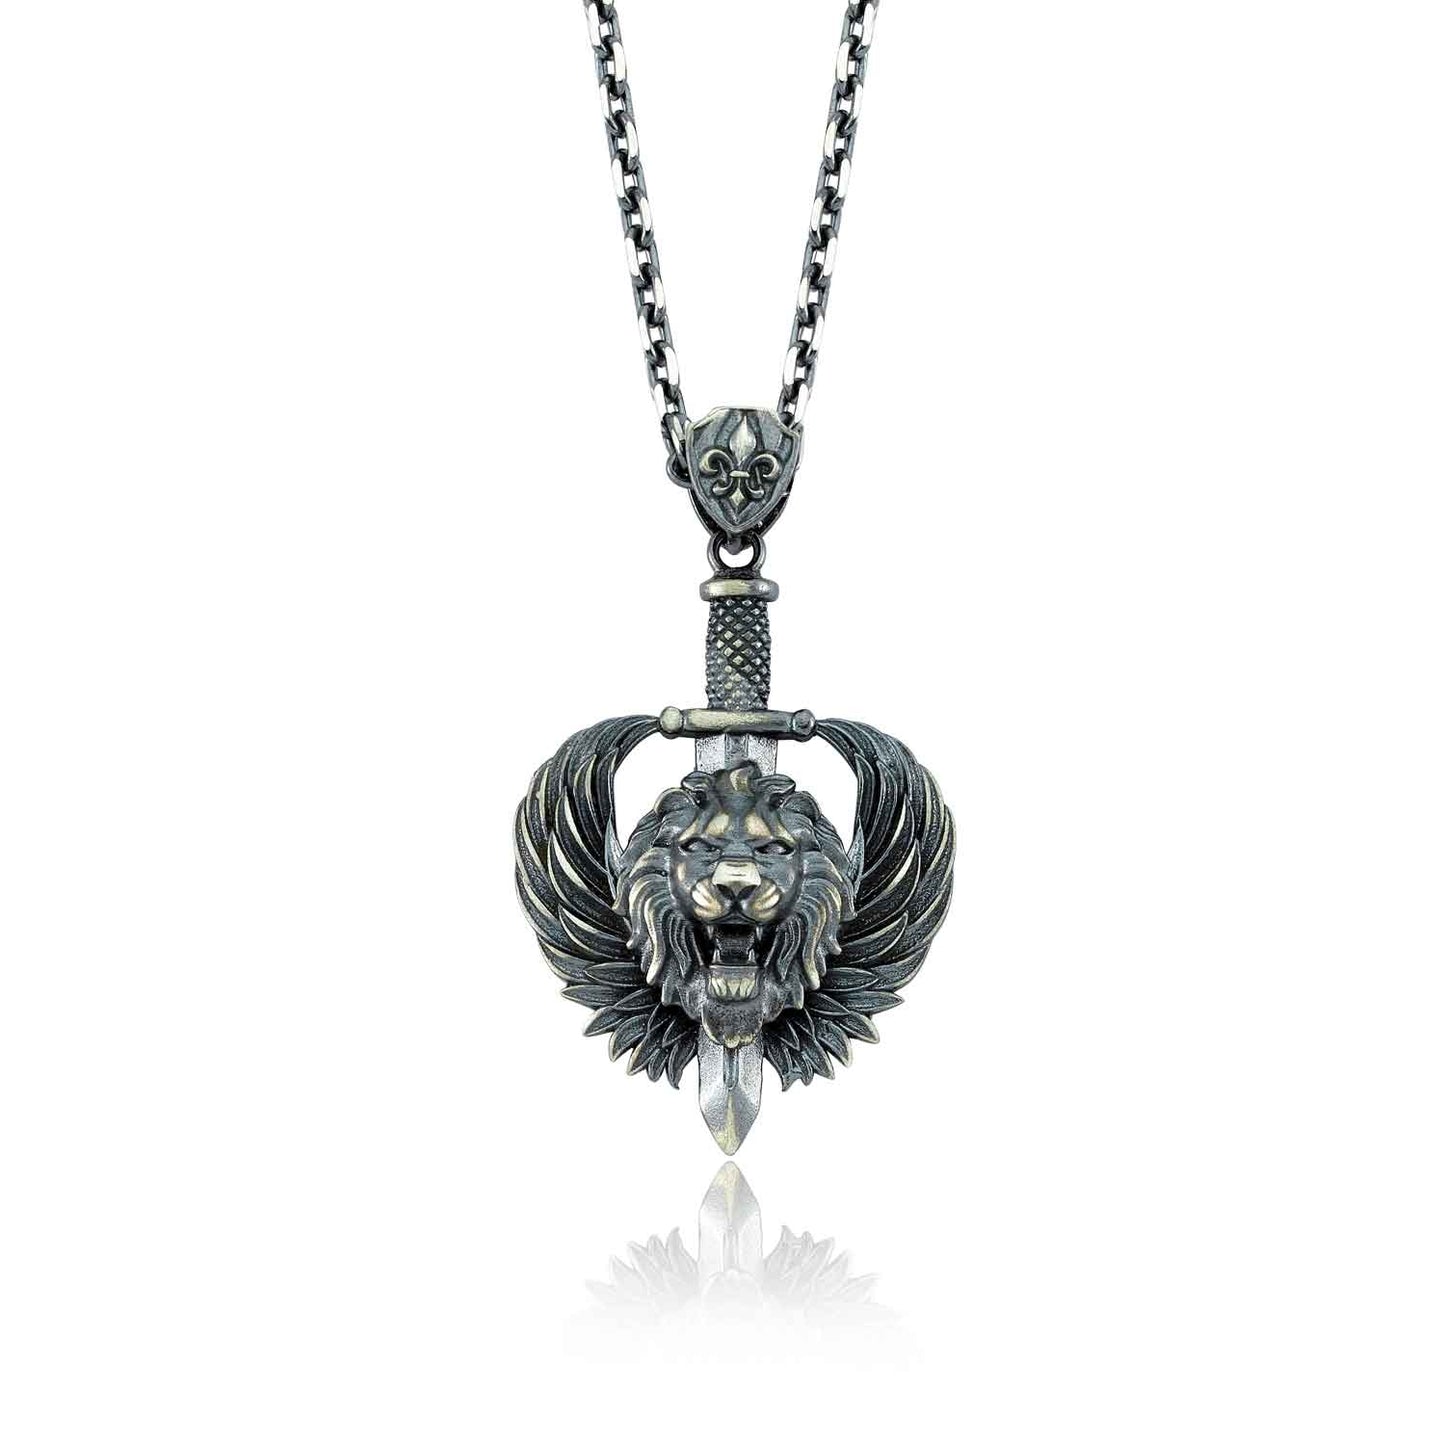 RARE PRINCE by CARAT SUTRA | Unique Designed Lion with Feathers & Sword Pendant for Men | 925 Sterling Silver Oxidized Pendant | Men's Jewelry | With Certificate of Authenticity and 925 Hallmark - caratsutra